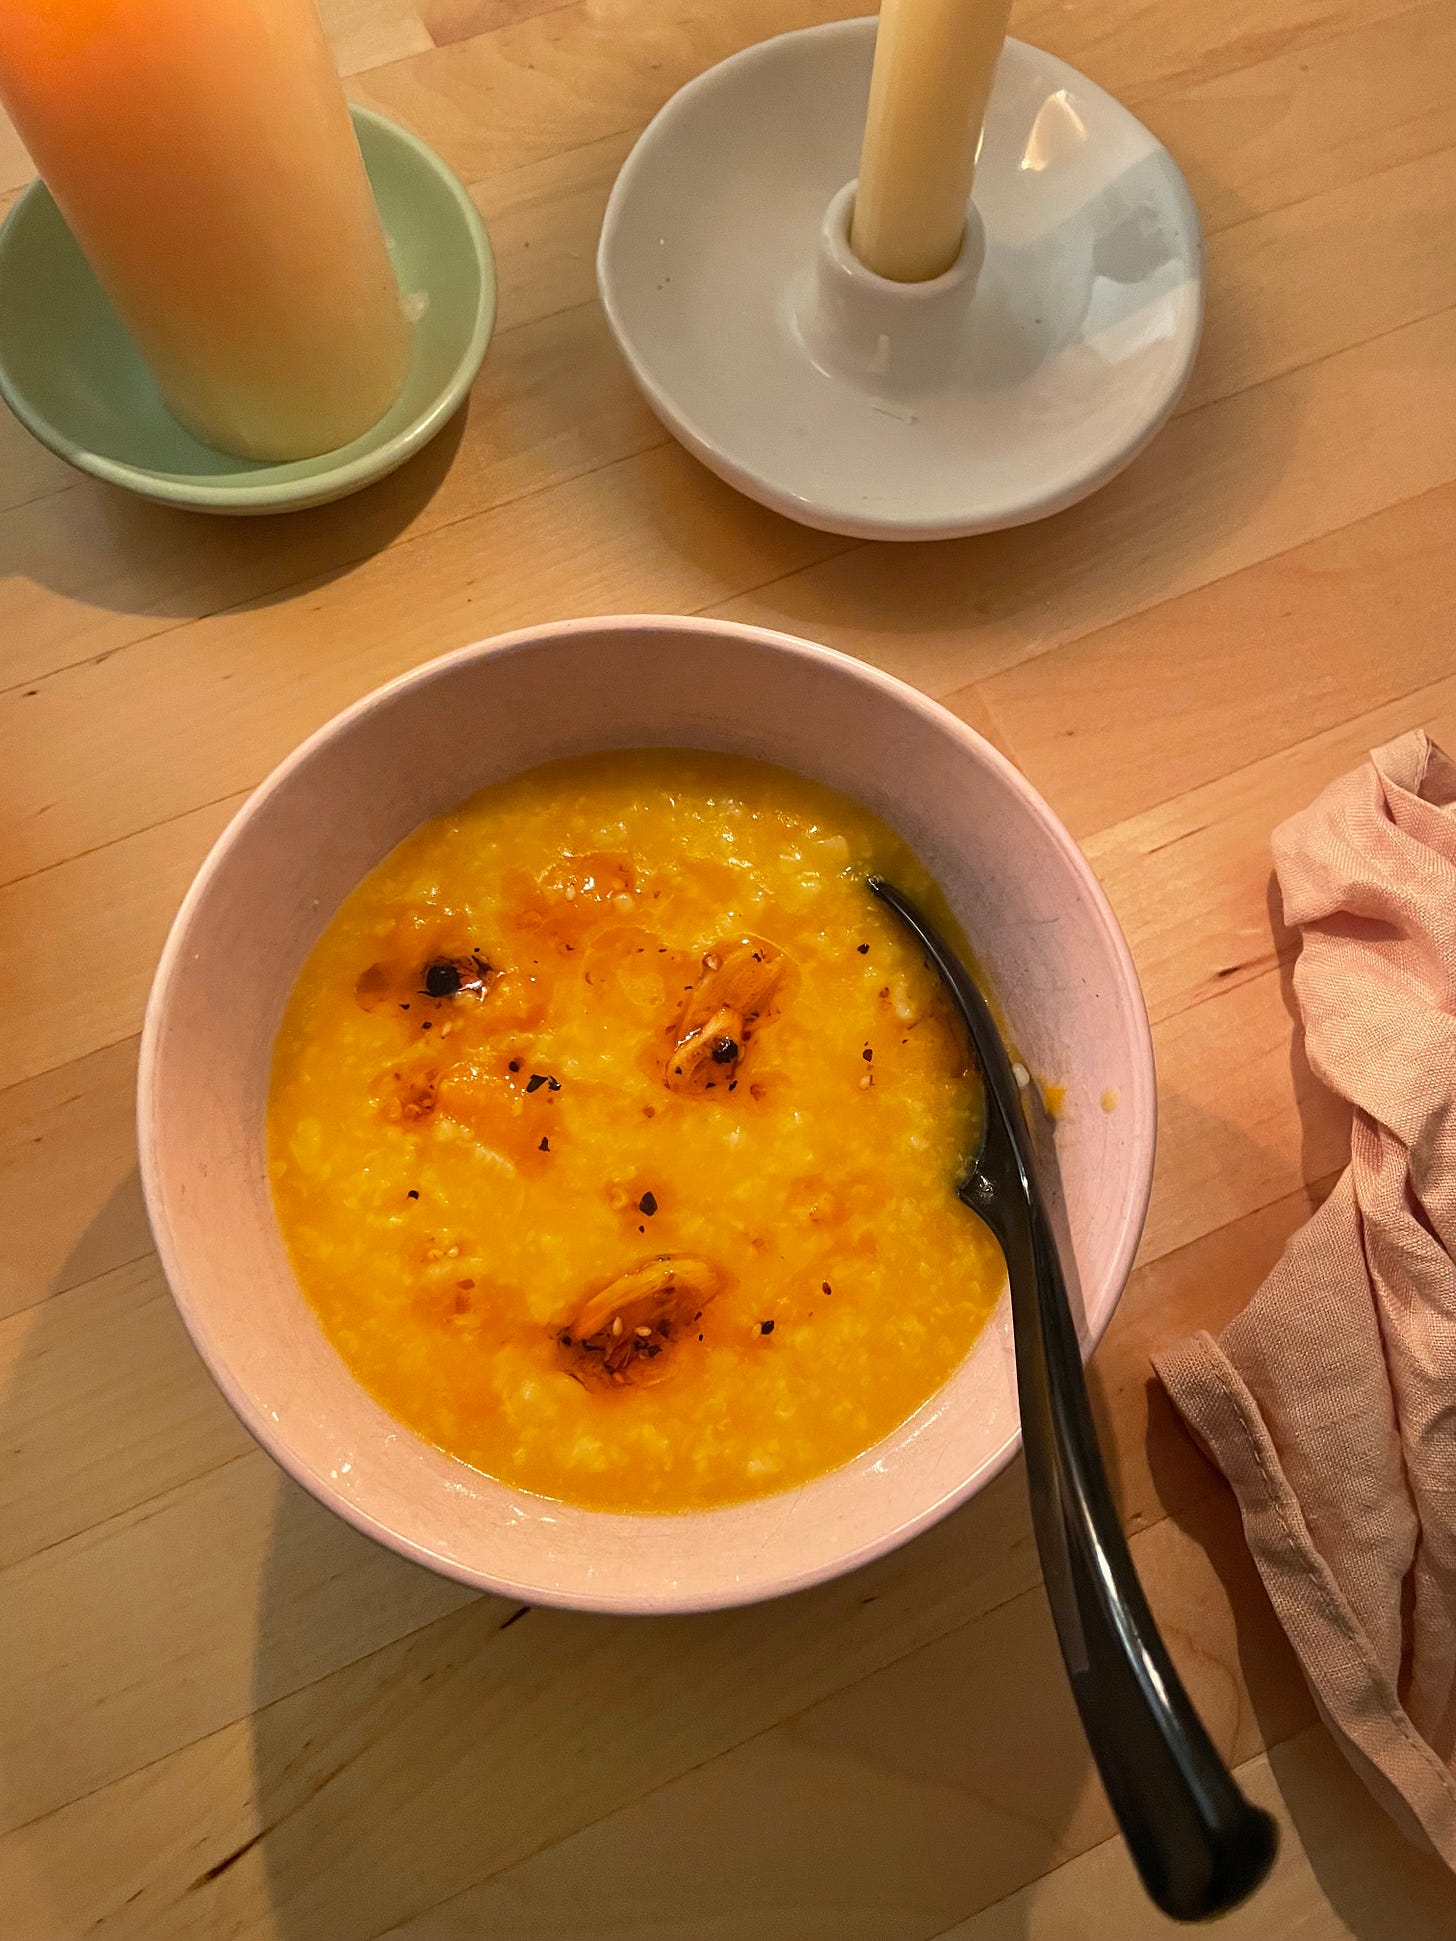 Bowl of pumpkin congee which is orange in colour, chilli oil swirled on top.